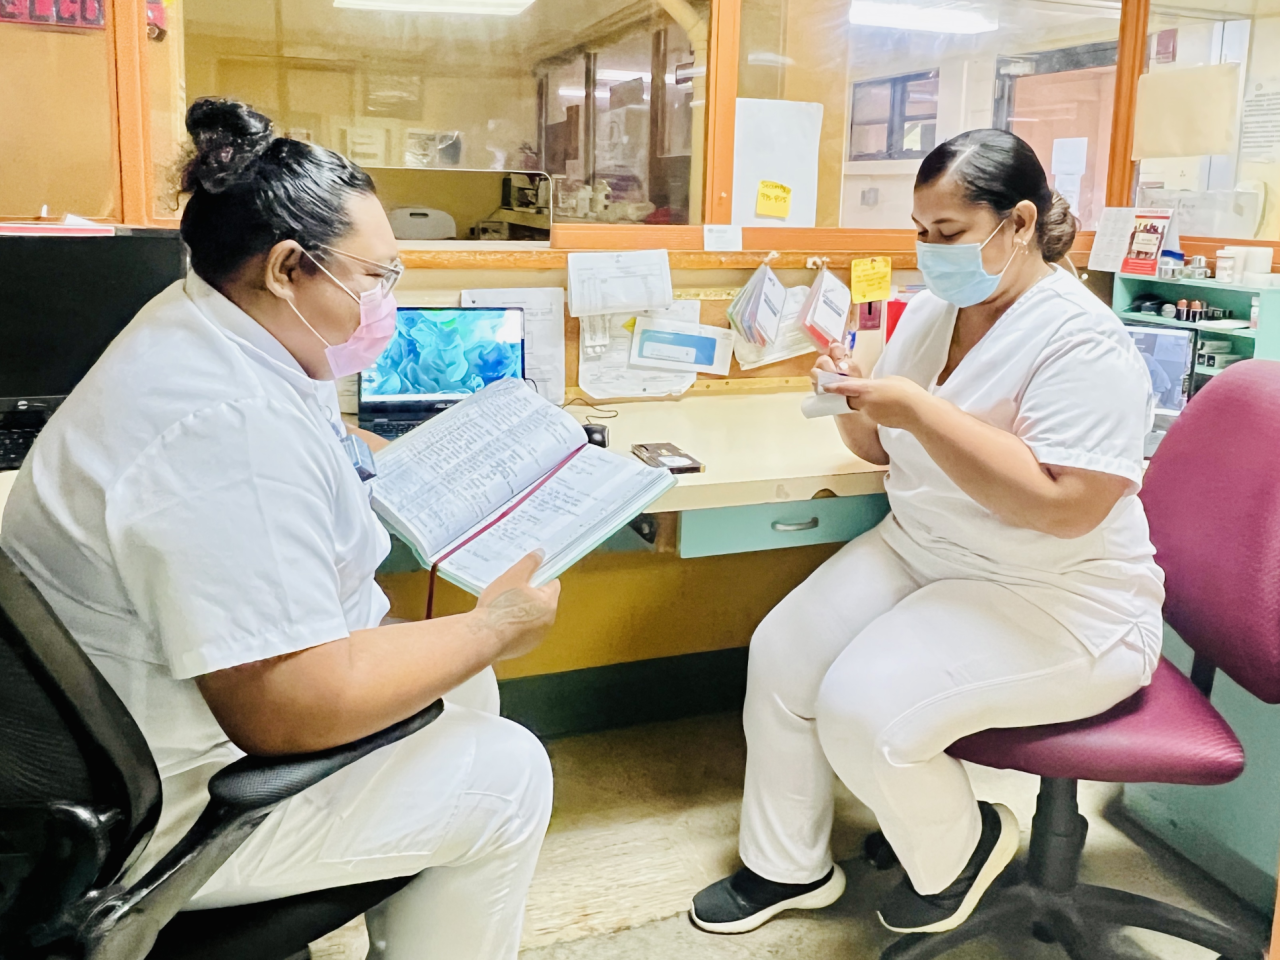 Two women nurses with face masks sitting on chairs inside a hospital reception counter: one woman with a record book in her hands and the other writing down on a piece of paper